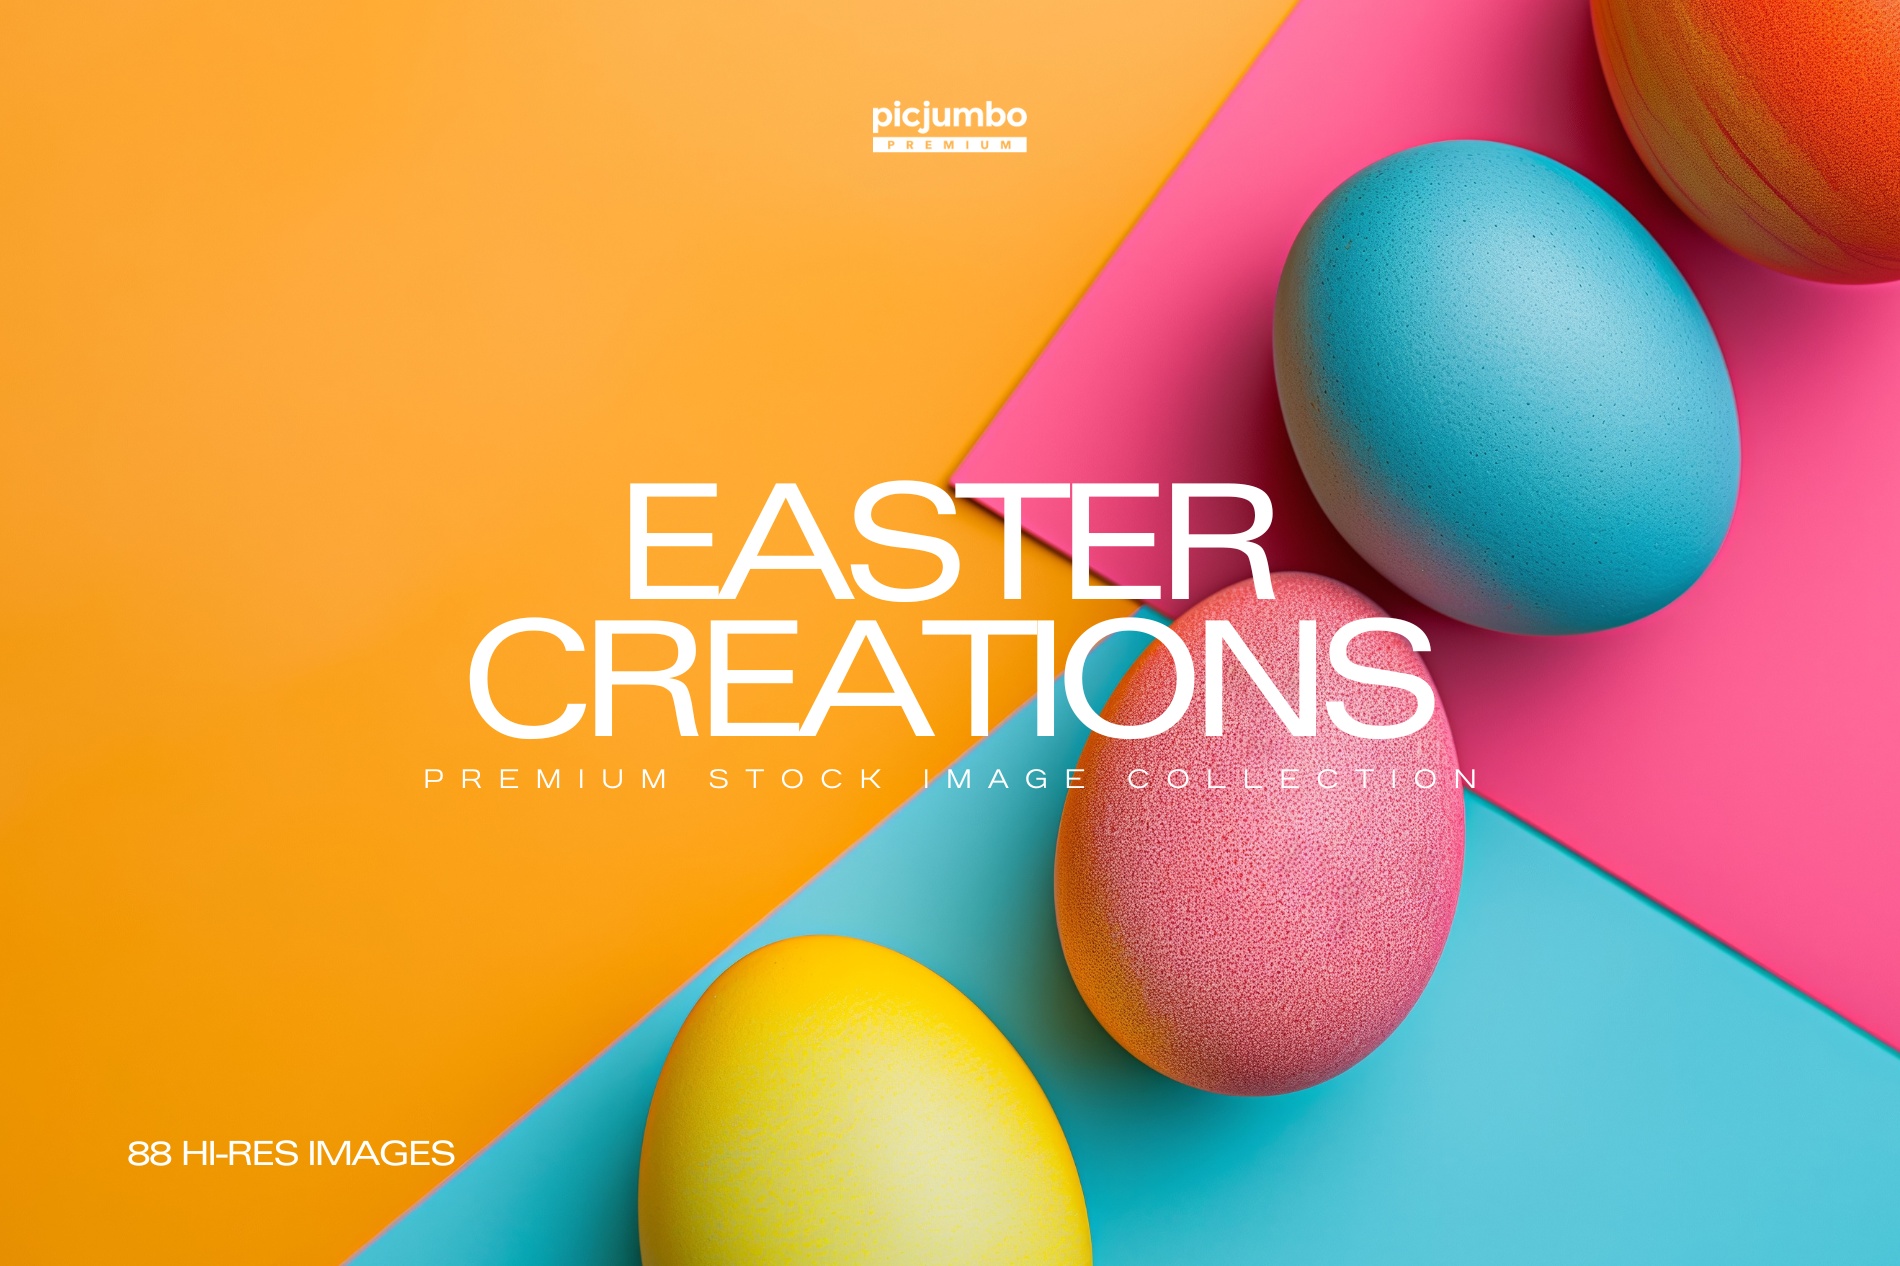 Download hi-res stock photos from our Easter Creations PREMIUM Collection!